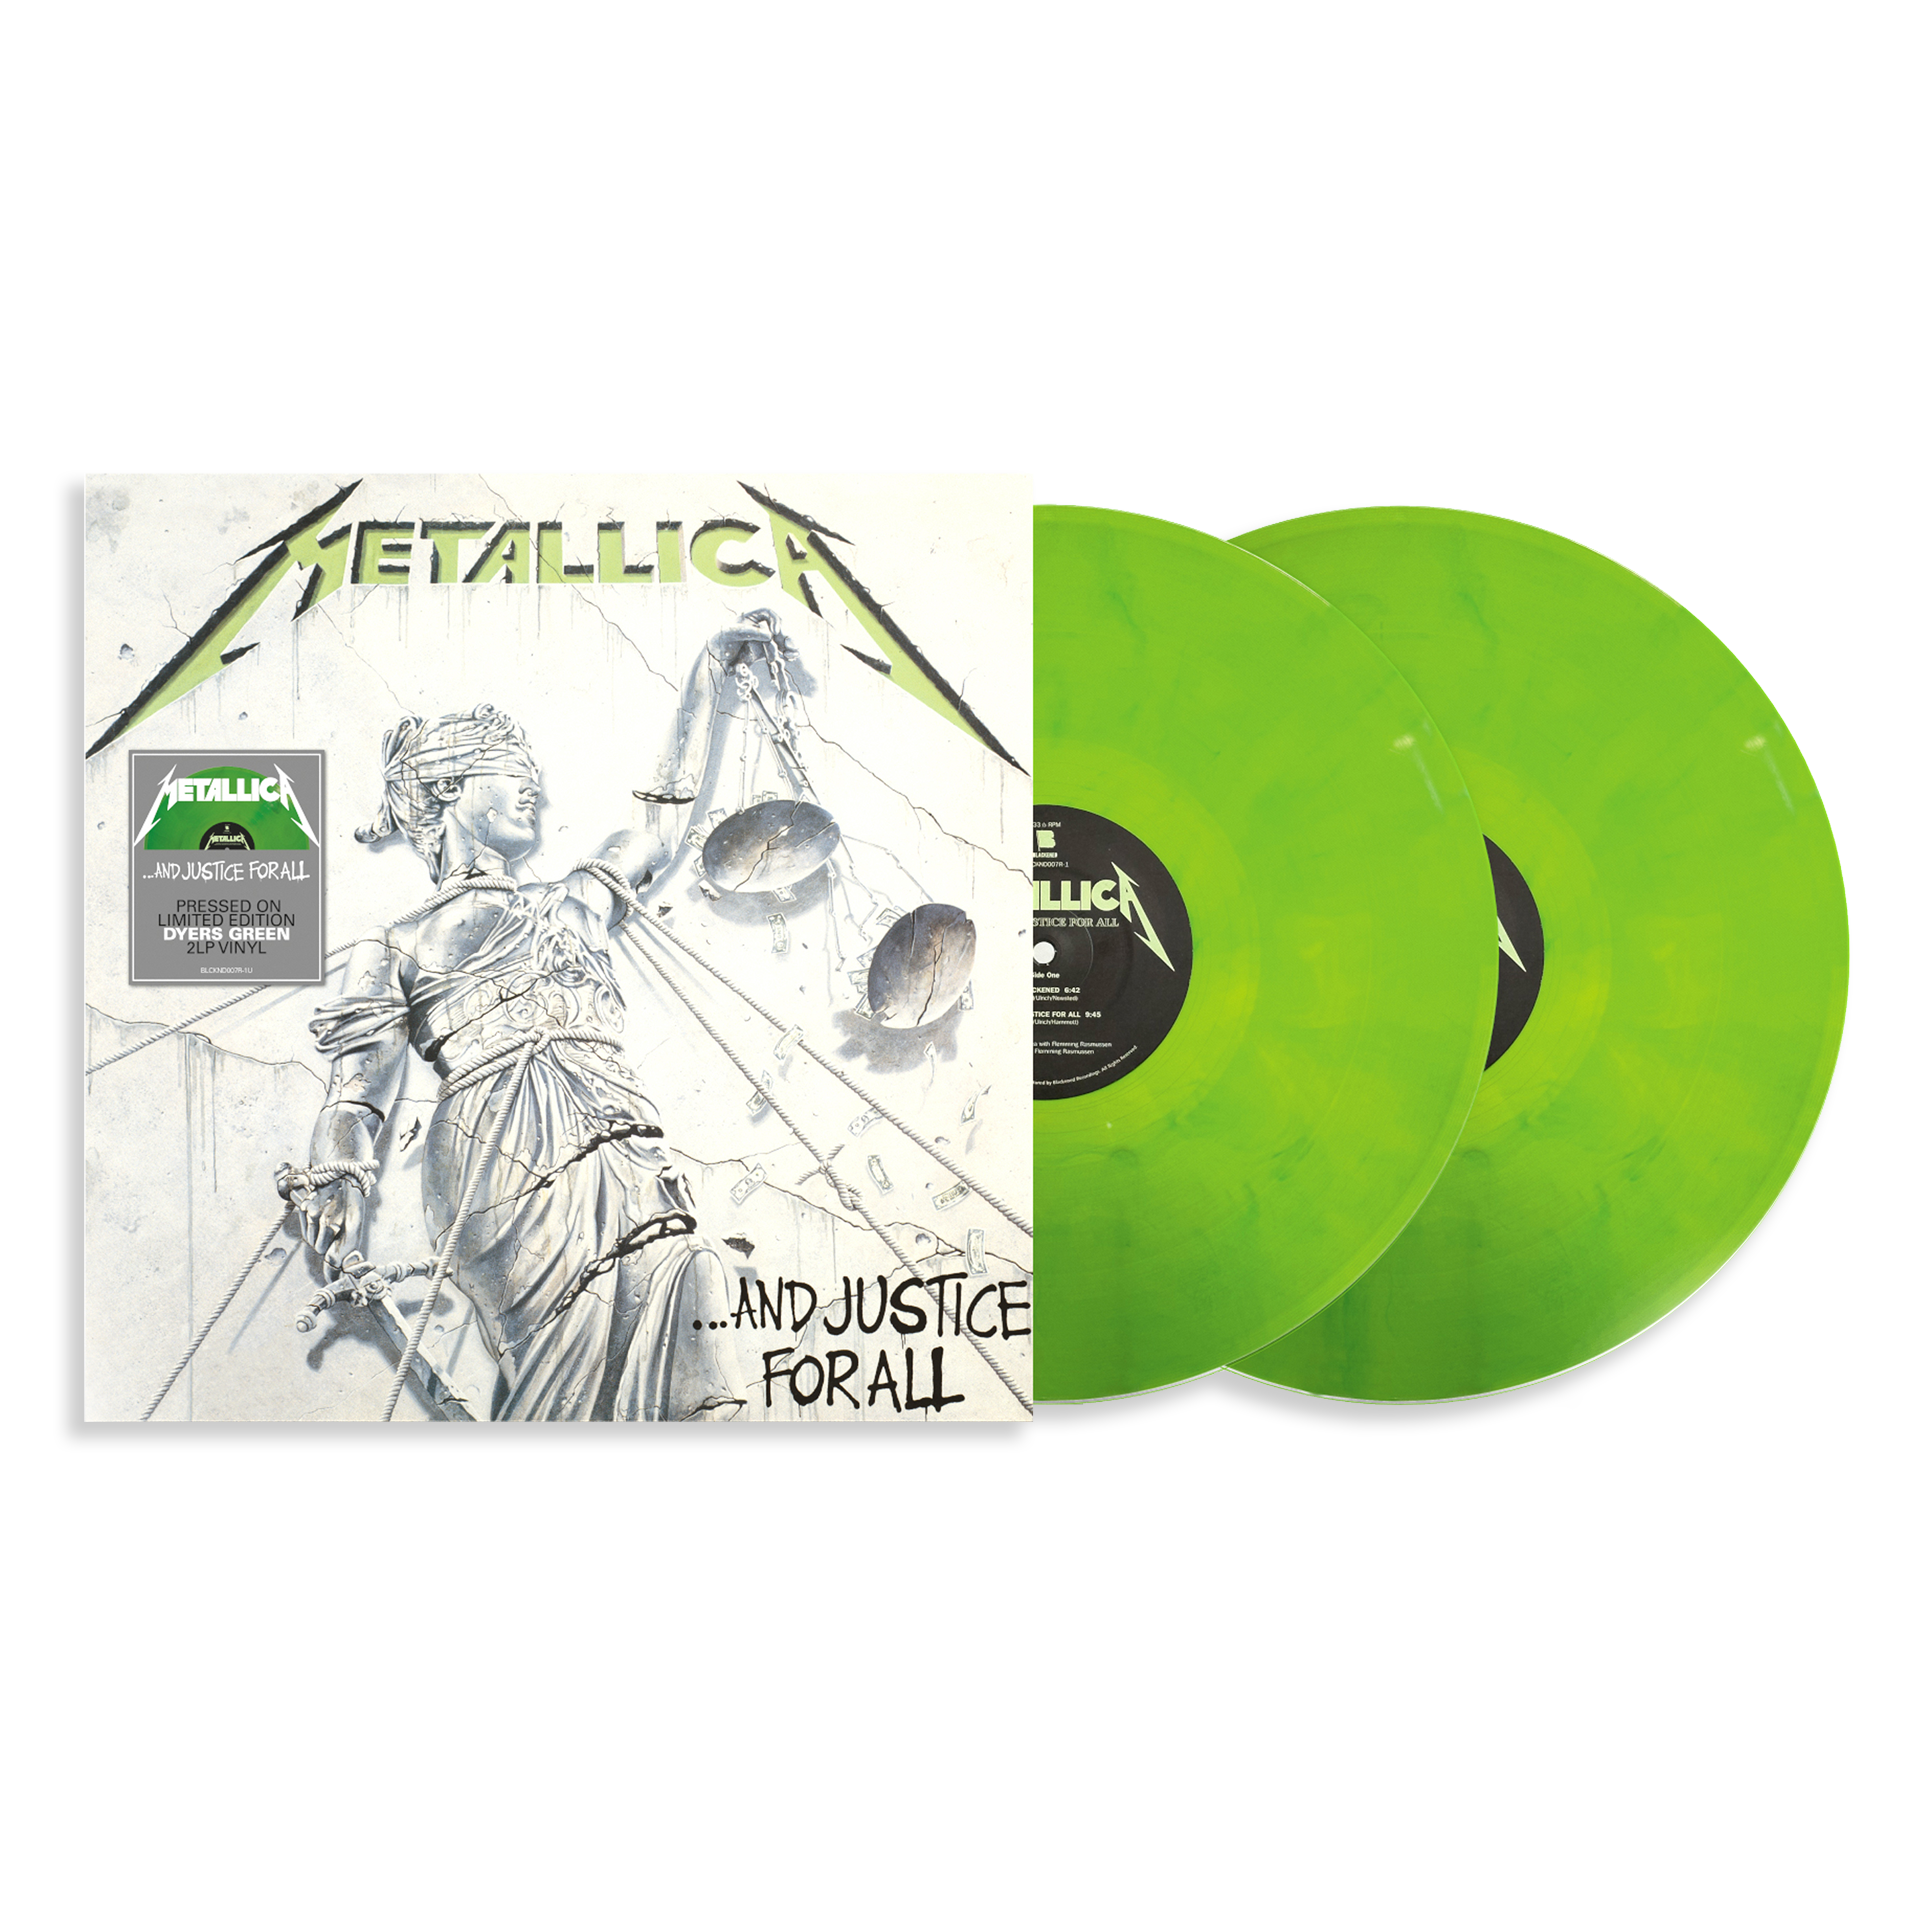 Metallica - ...And Justice For All: Limited 'Dyers Green' Vinyl 2LP